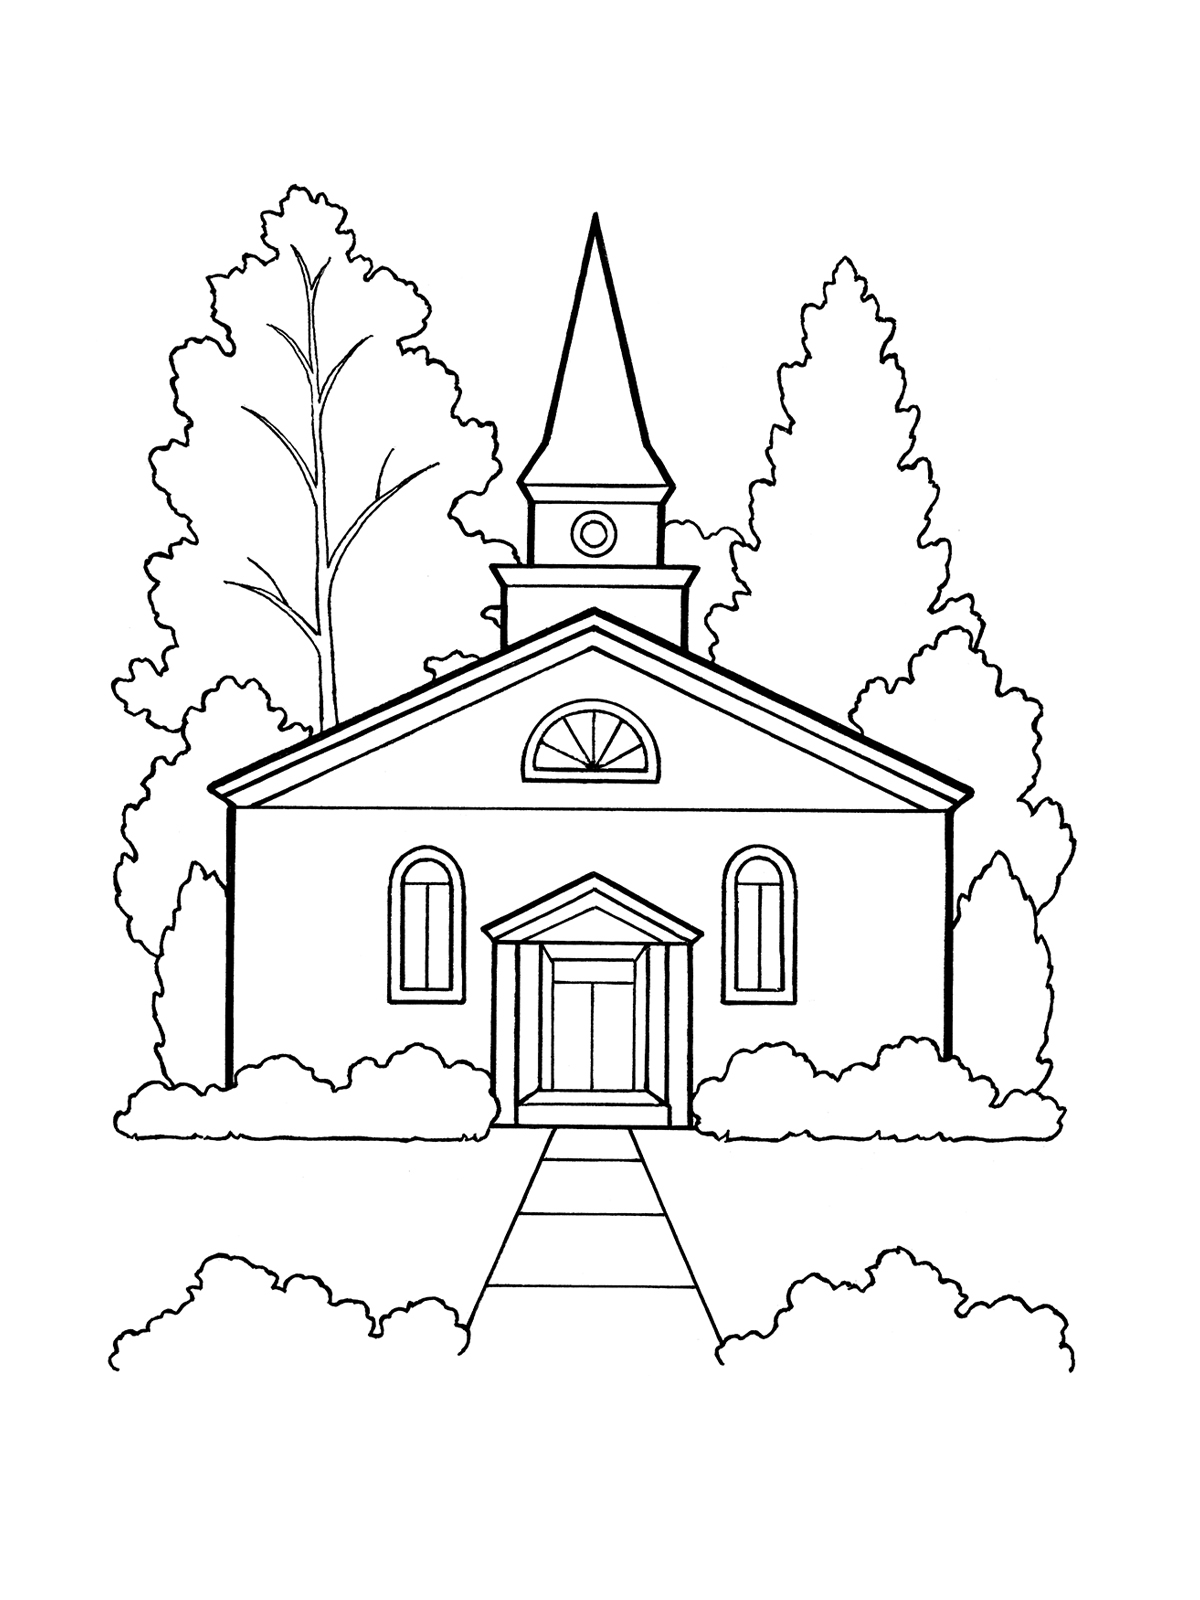 fathers day coloring pages for church